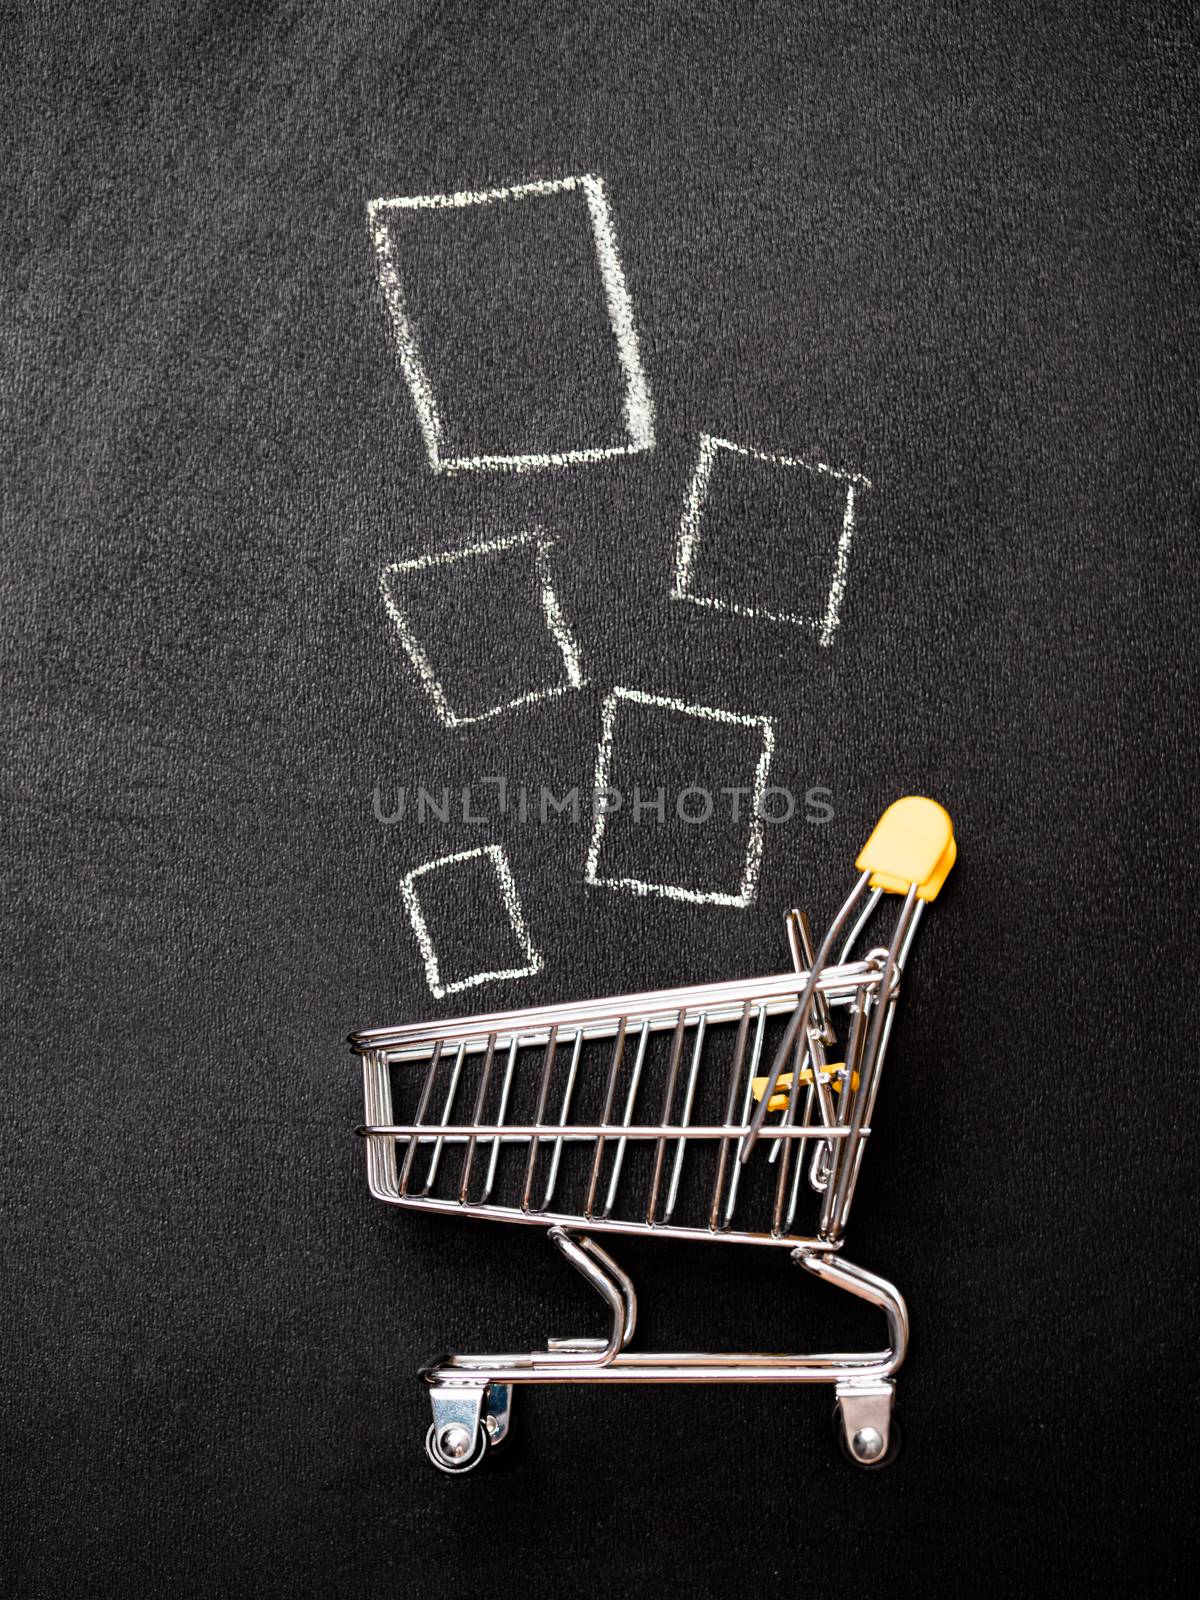 Shopping cart and products on chalkboard. Shop trolley at supermarket as sale, discount, shopaholism concept. Top view or flat lay. Vertical